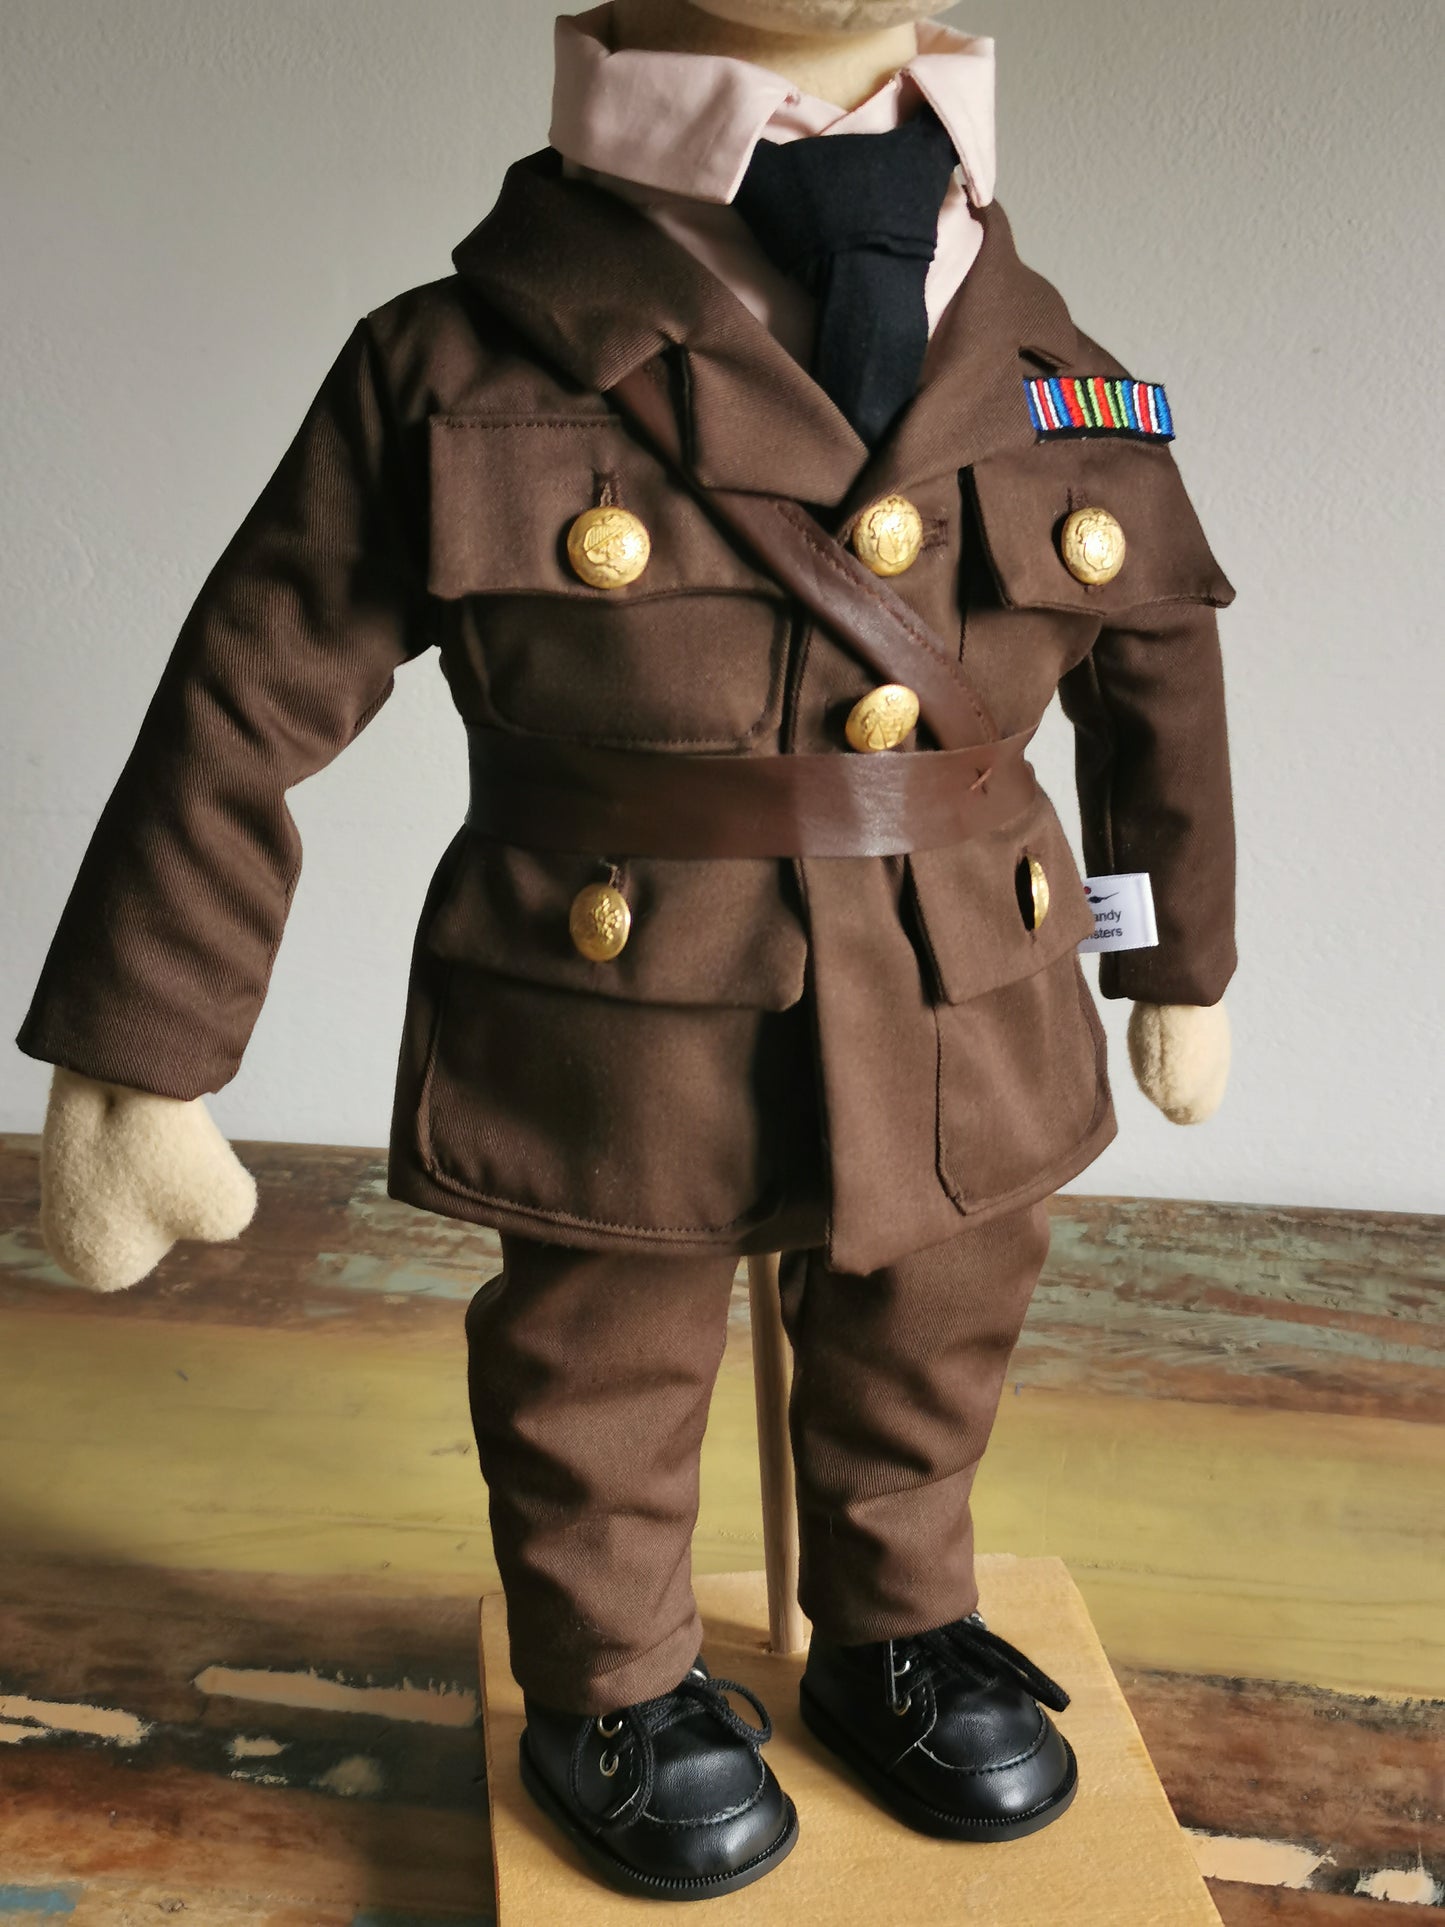 Captain James portrait doll, custom plush doll based on Ghosts BBC series, military doll, mini-me soldier doll